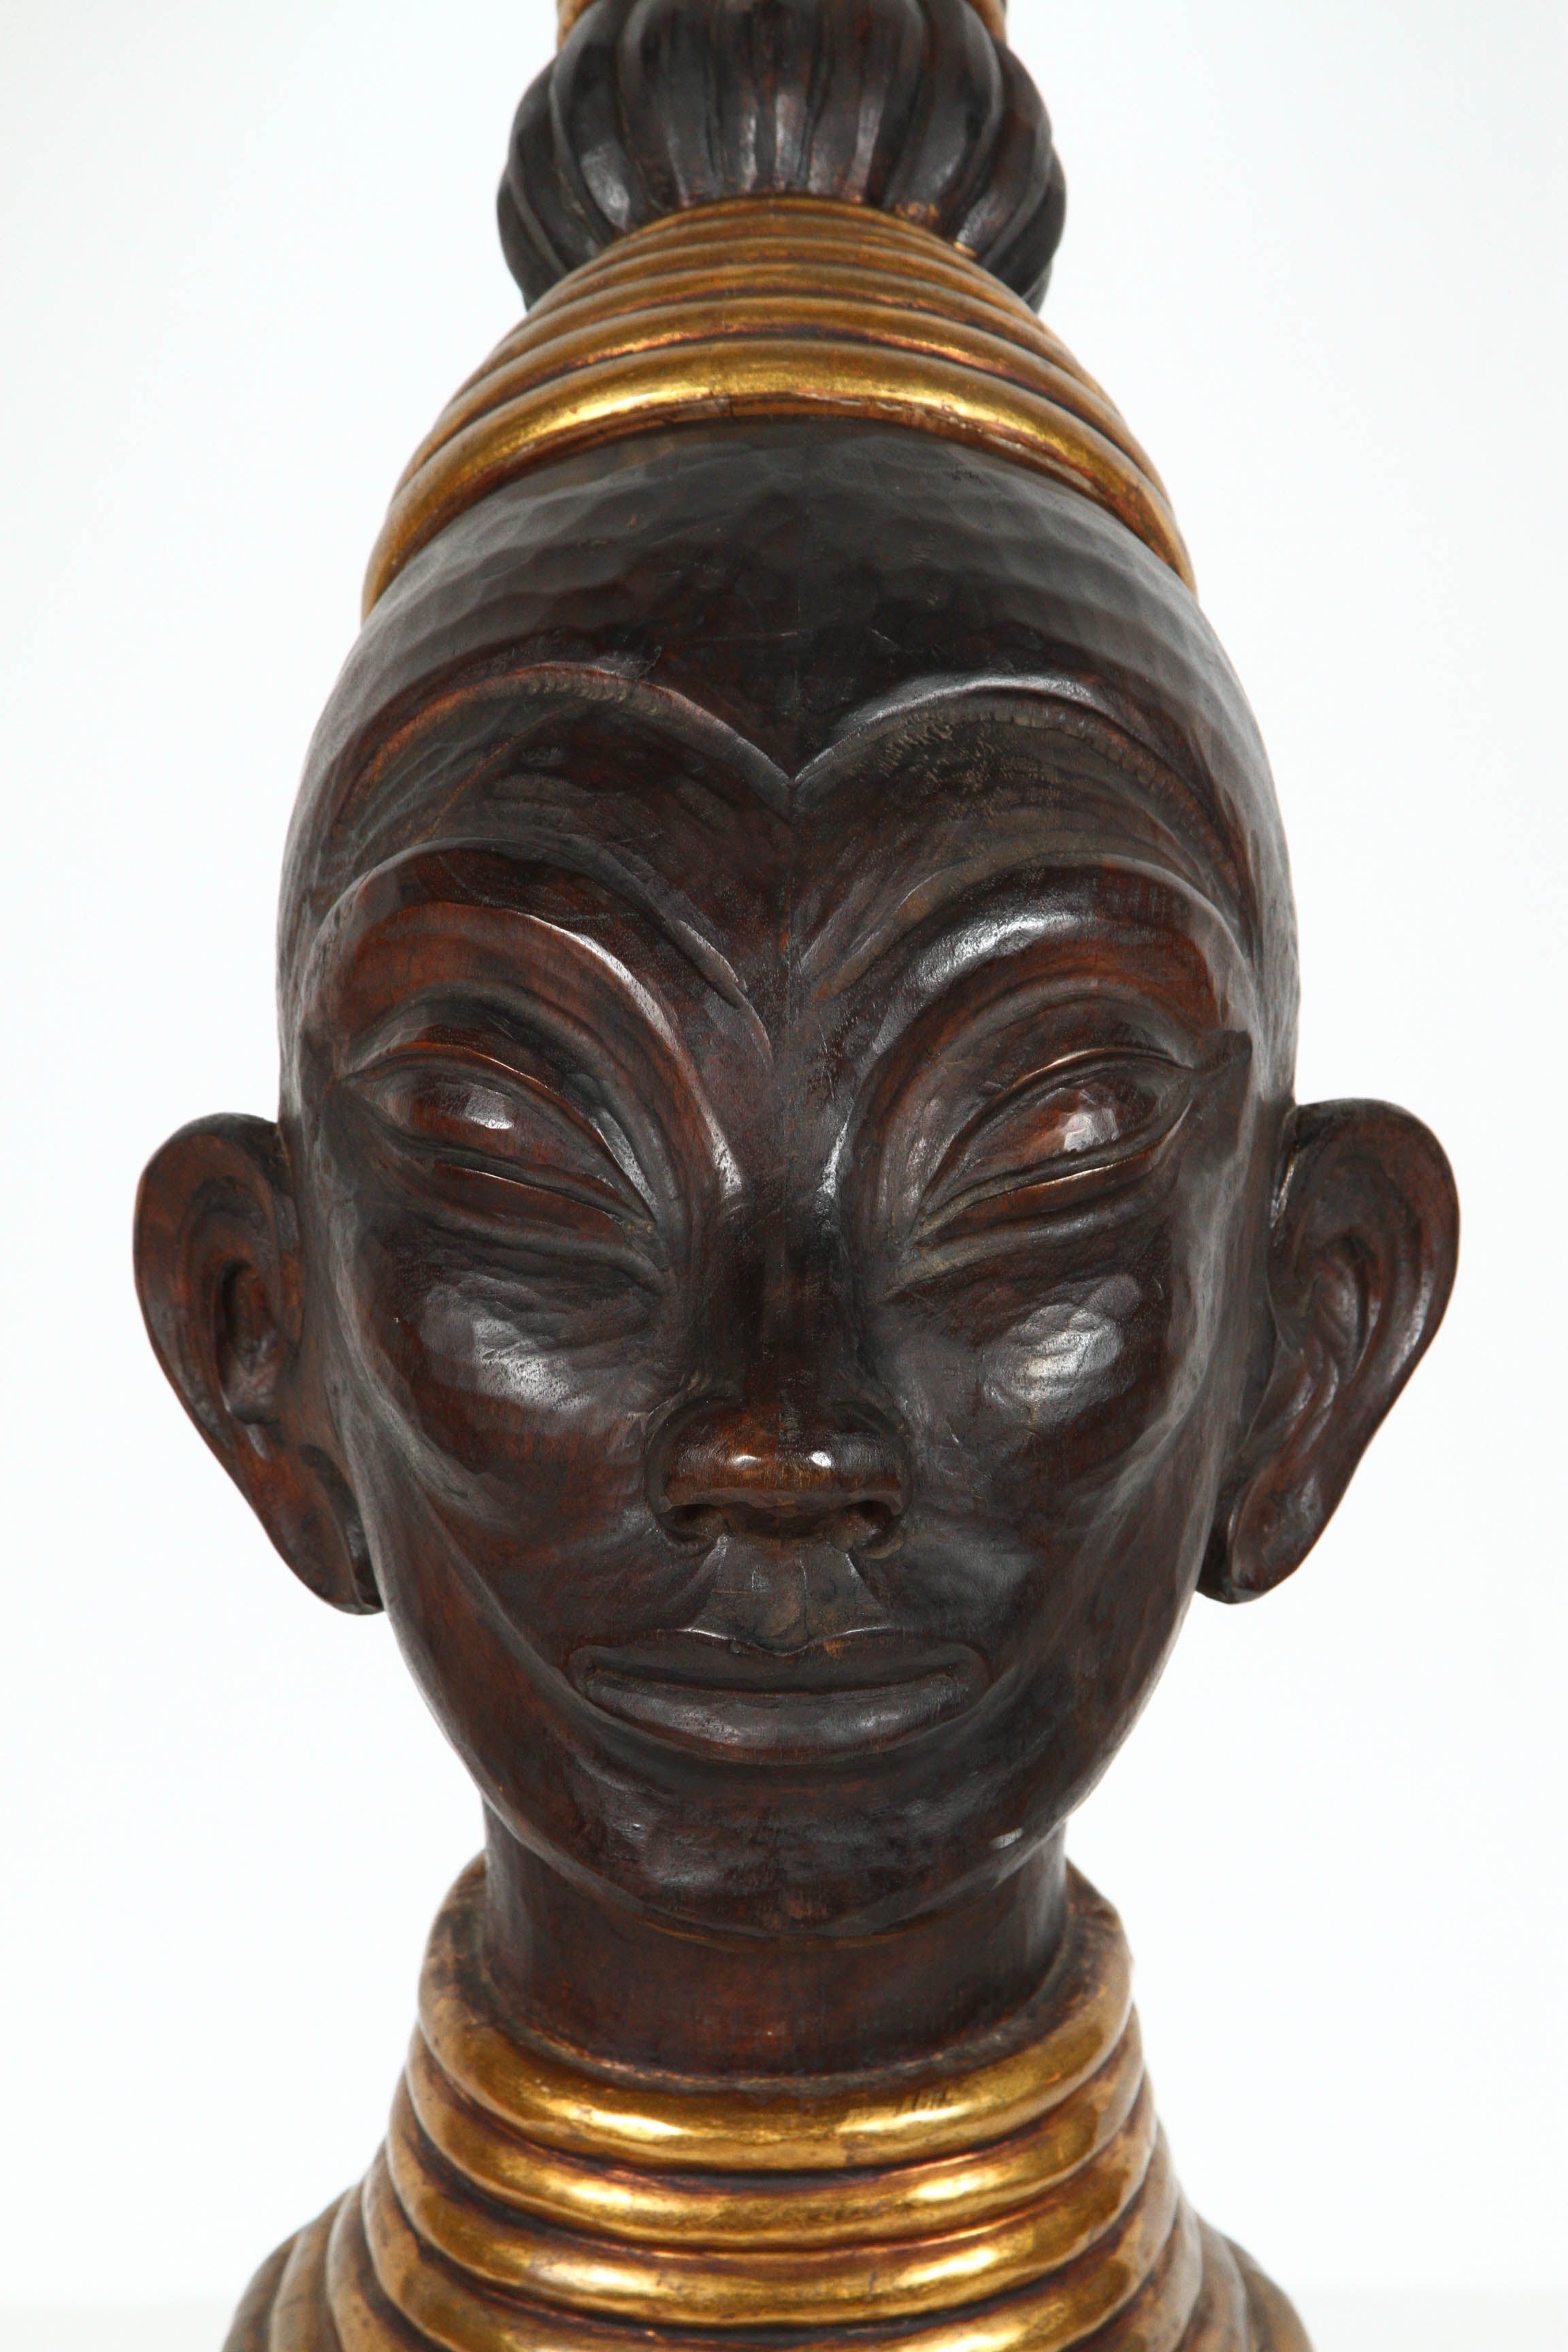 Hand-Carved Zulu Wooden Tribal Contemporary Sculpture of Black African Male Bust